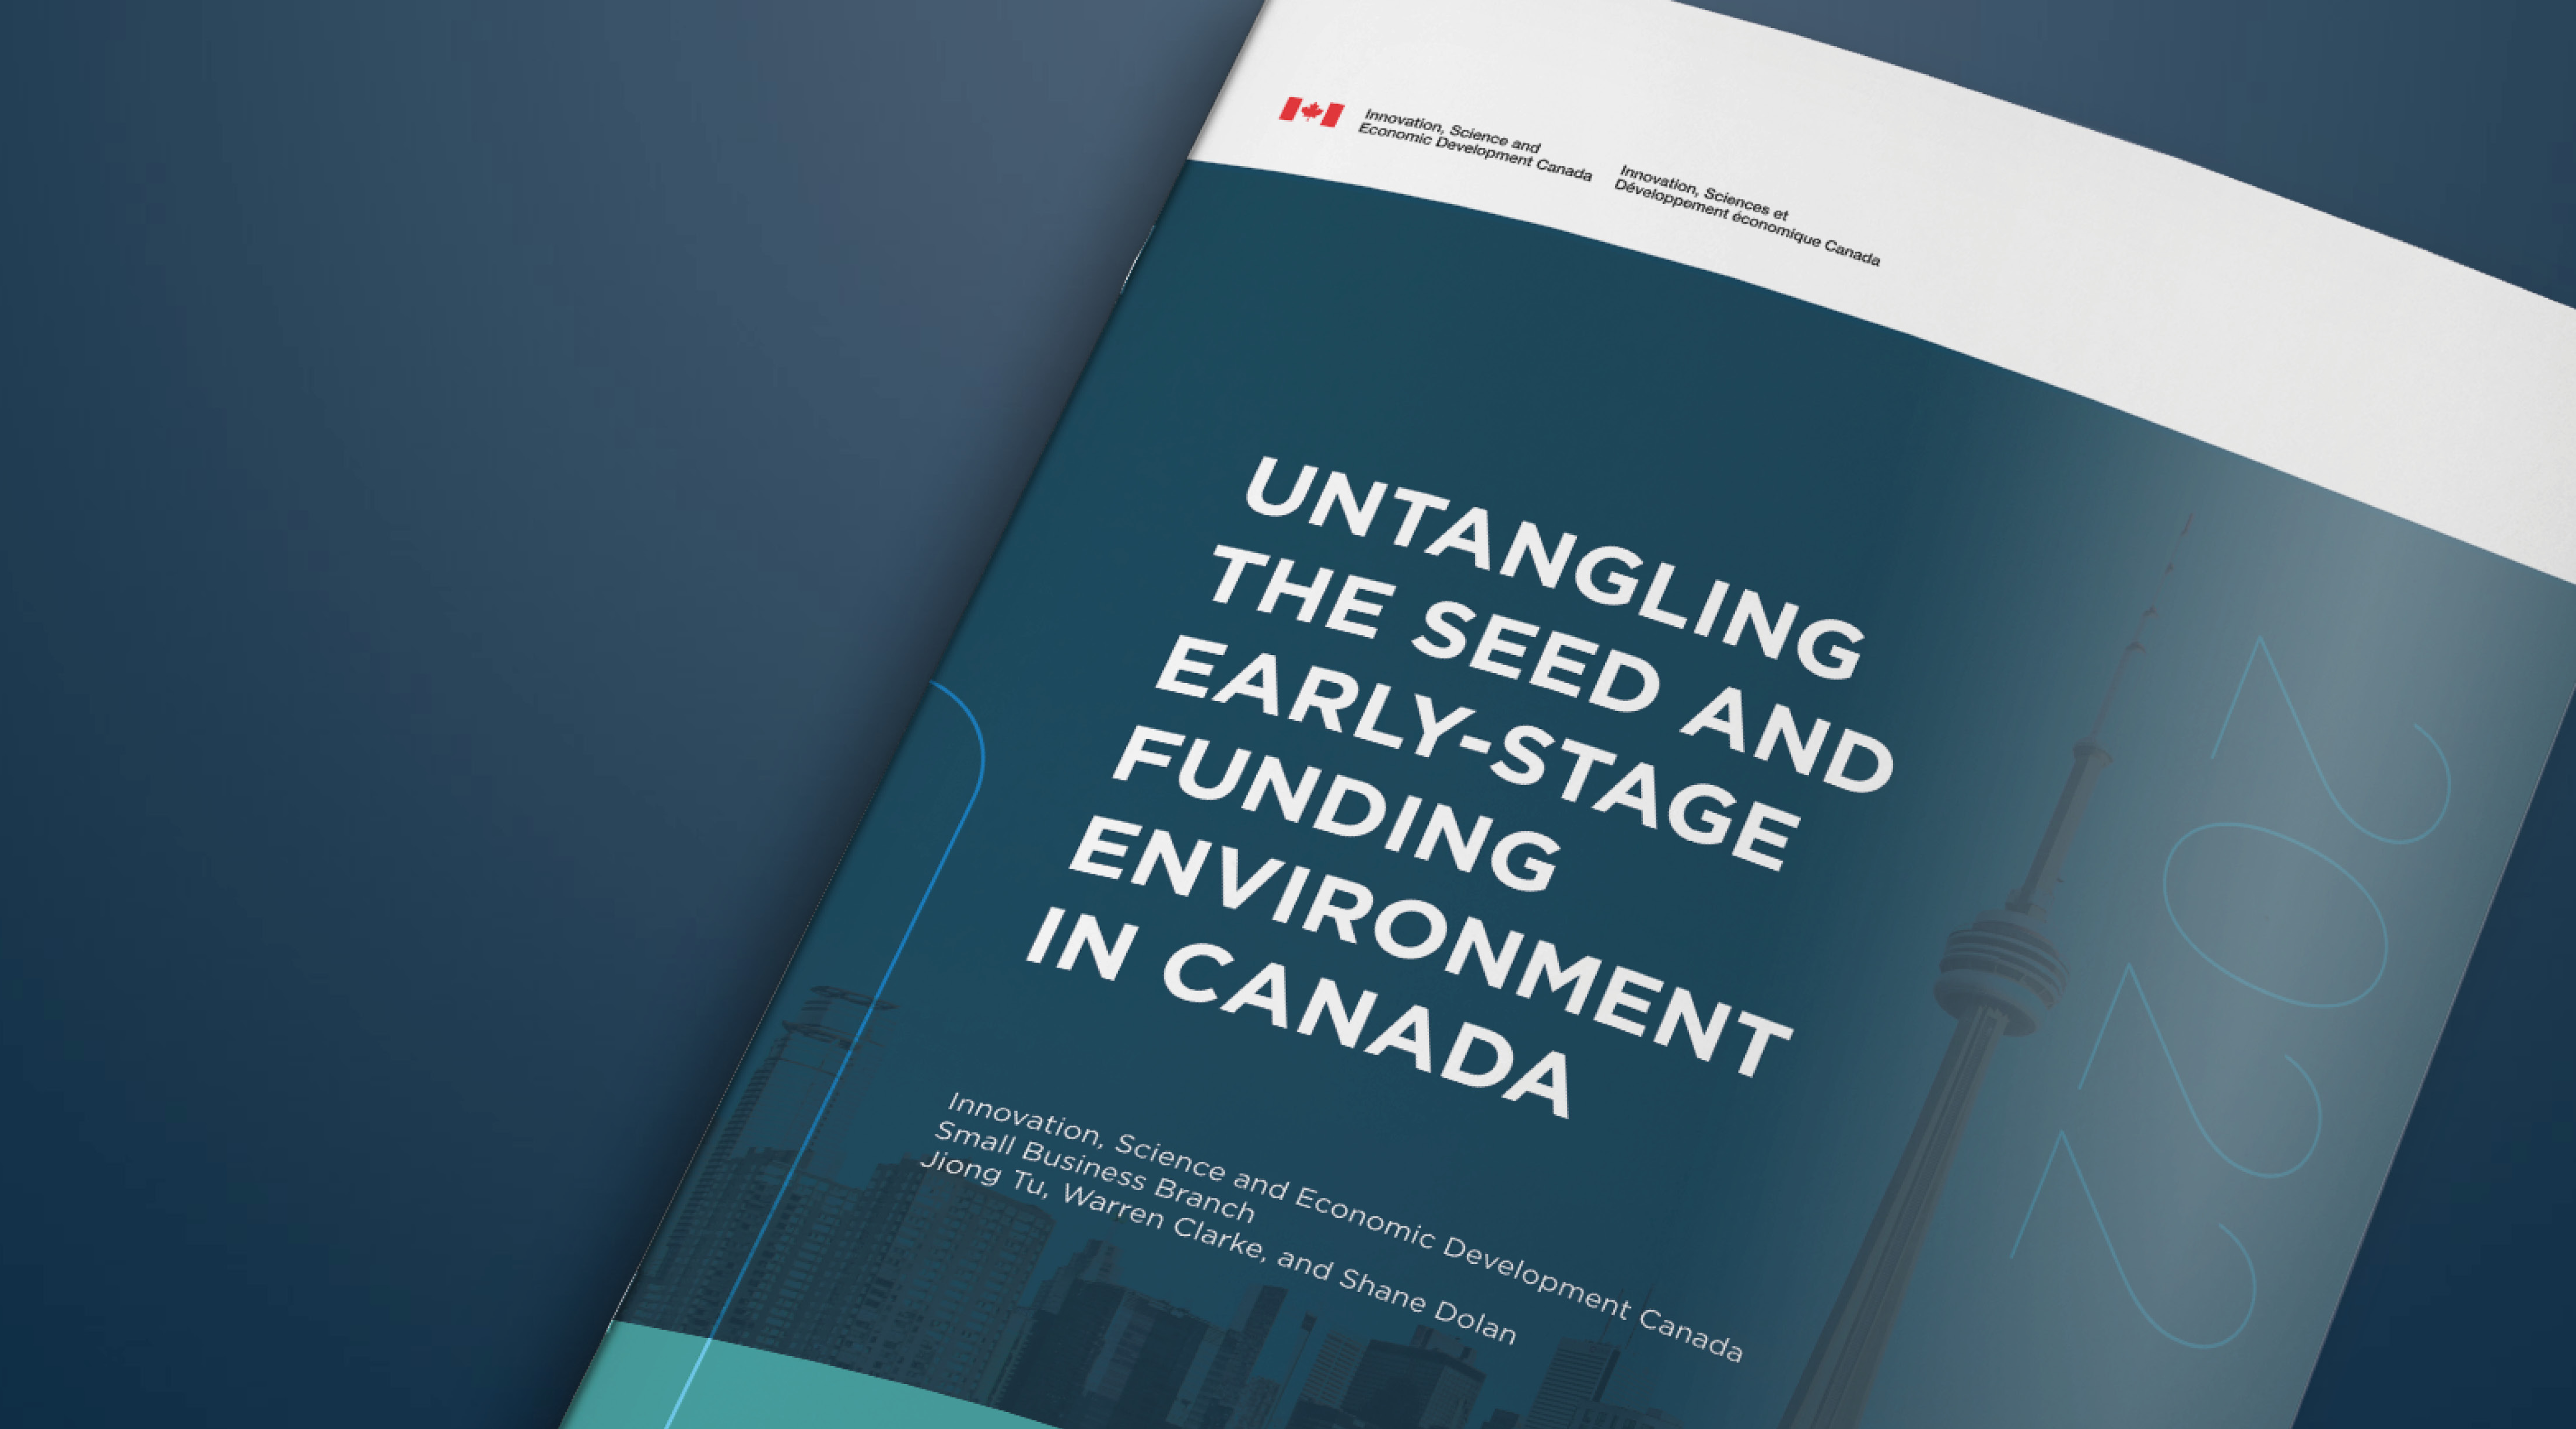 Untangling the seed and early-stage funding environment in Canada